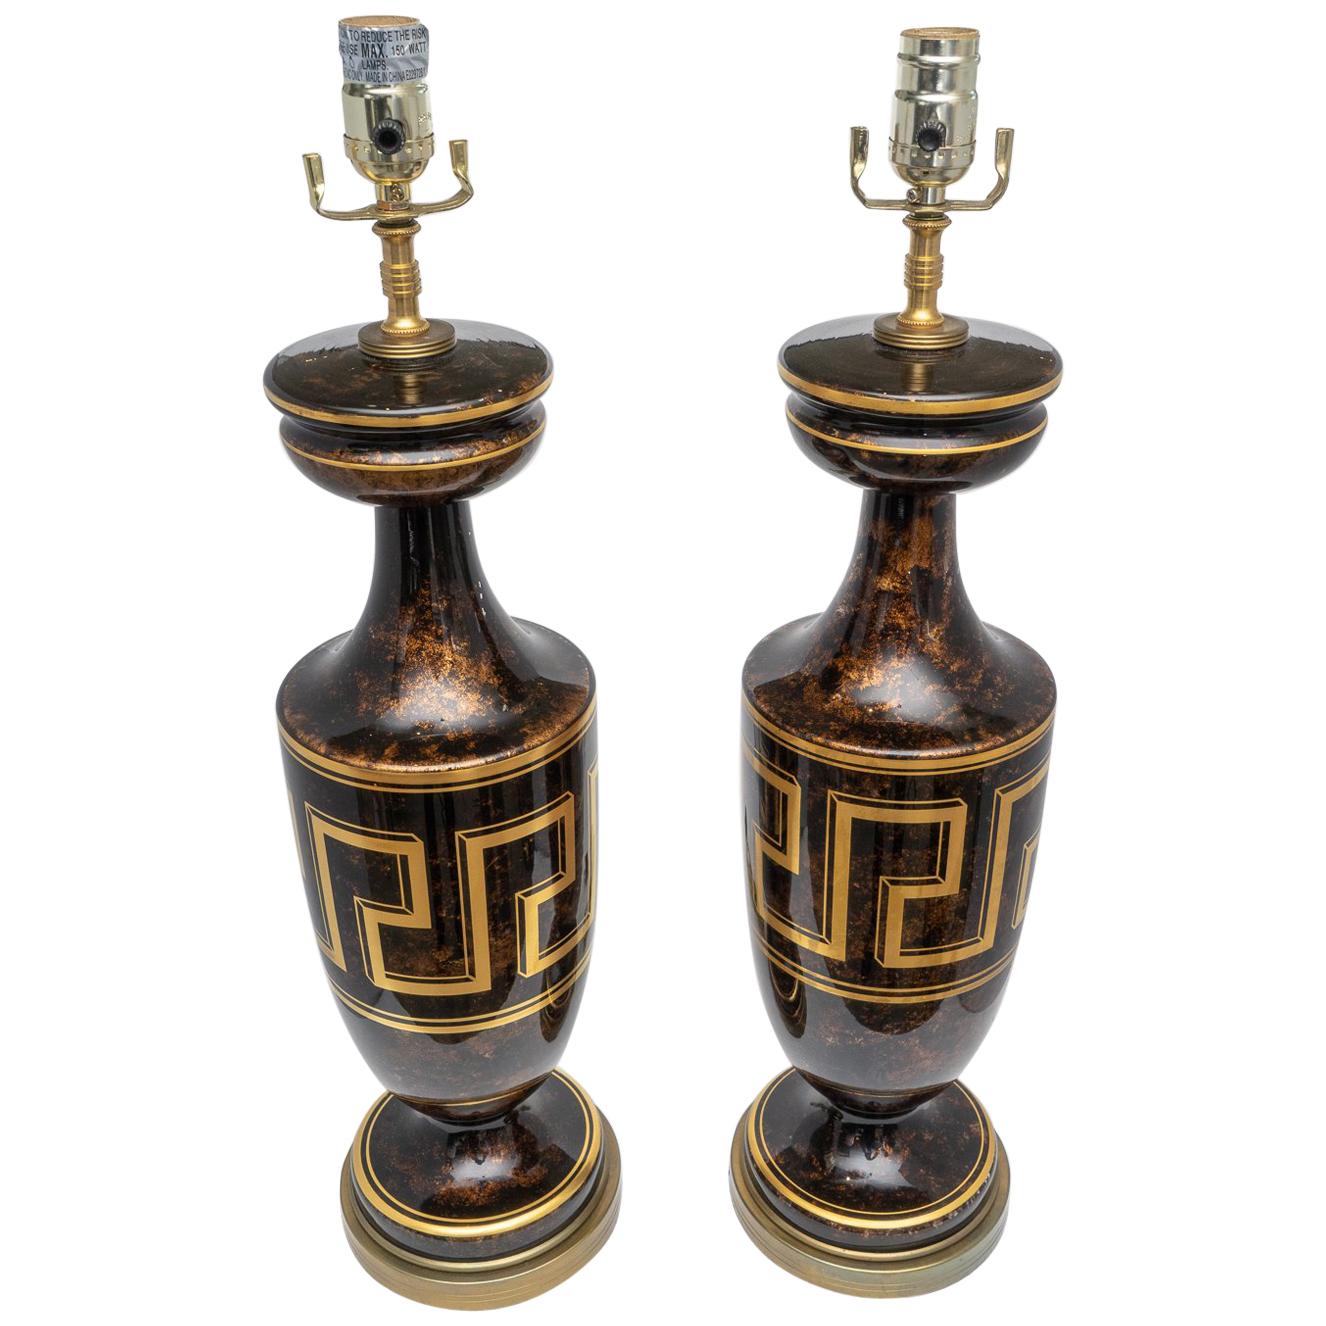 Pair of Table Lamps with Greek Key